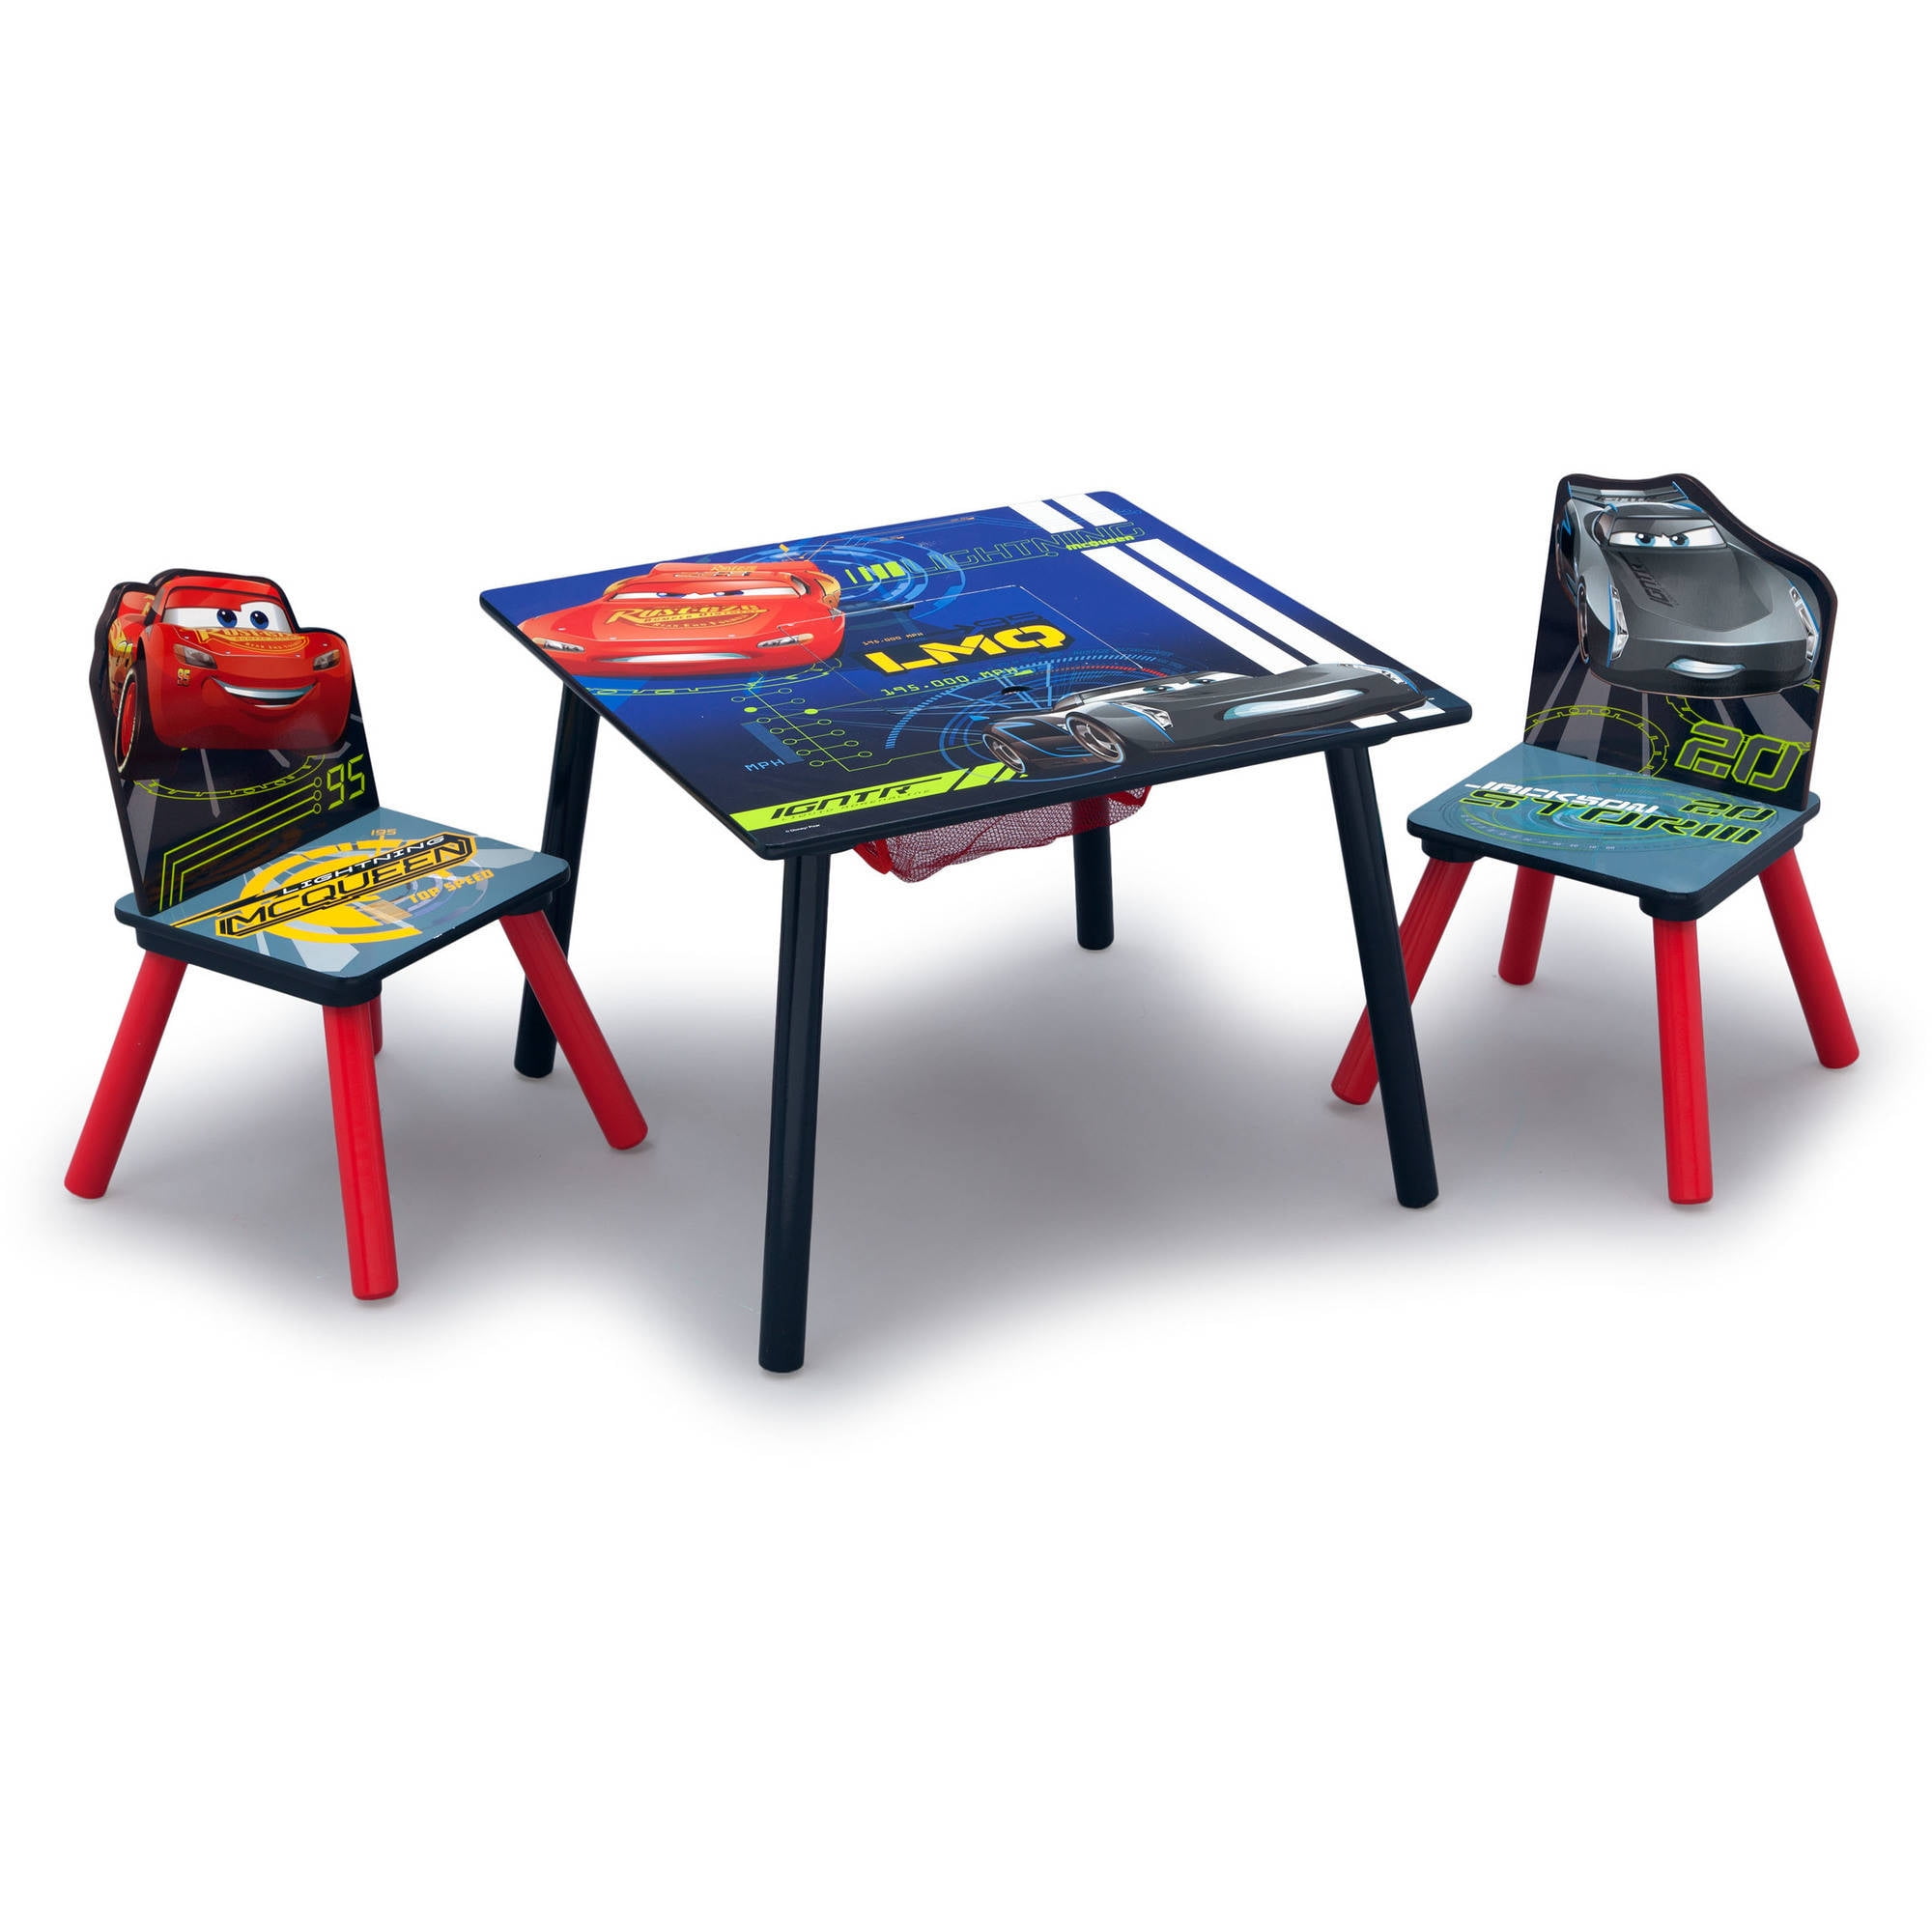 Disney Pixar Cars Kids' Table and Chair Set with Storage - Delta Children